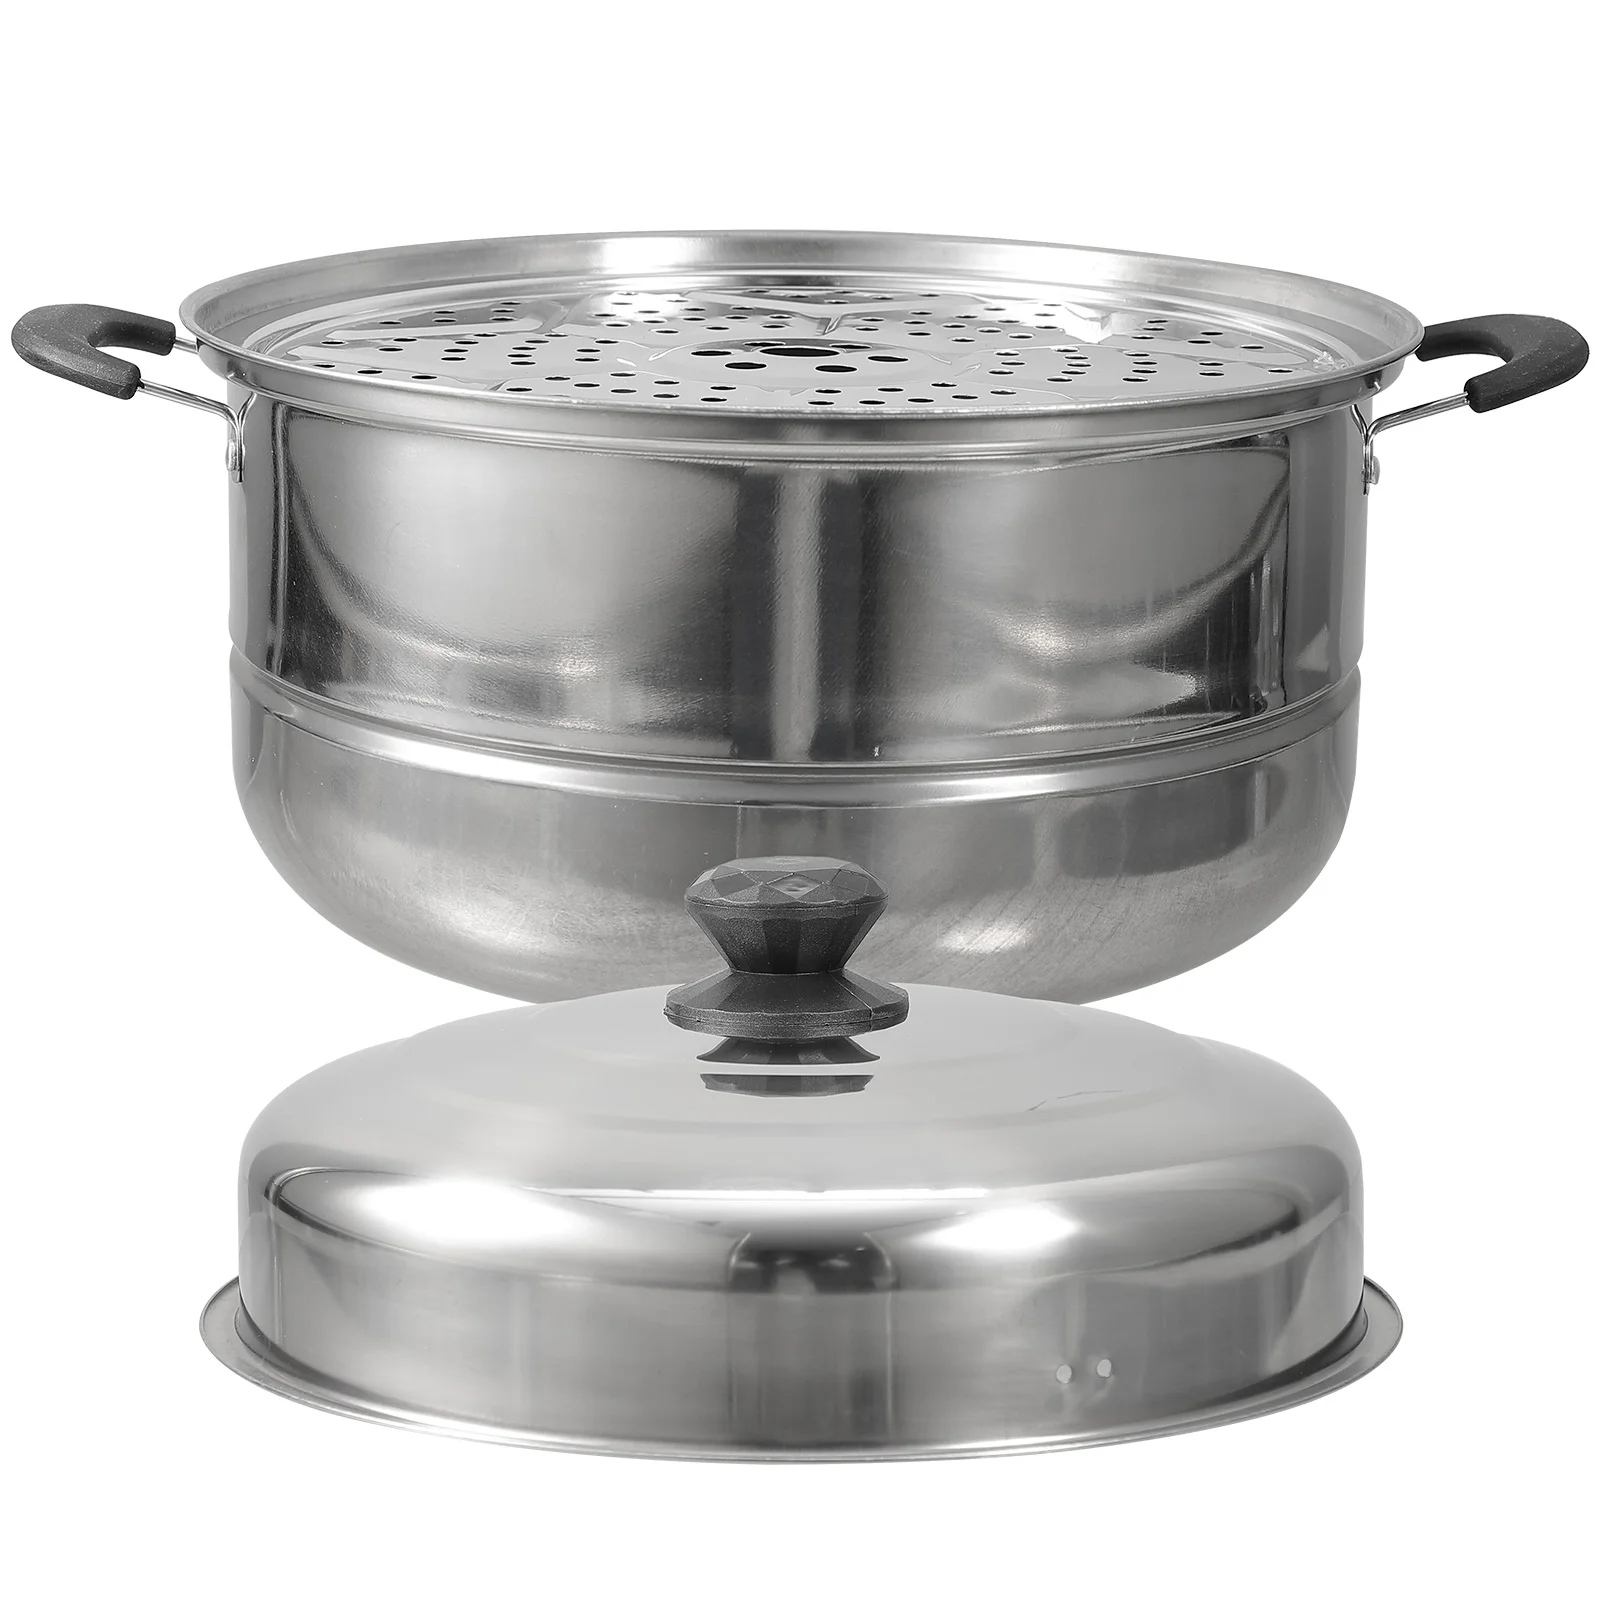 

Stainless Steel Steamer Pot Double-layered Stockpot Induction Steaming Cookware Kitchen Tools Food